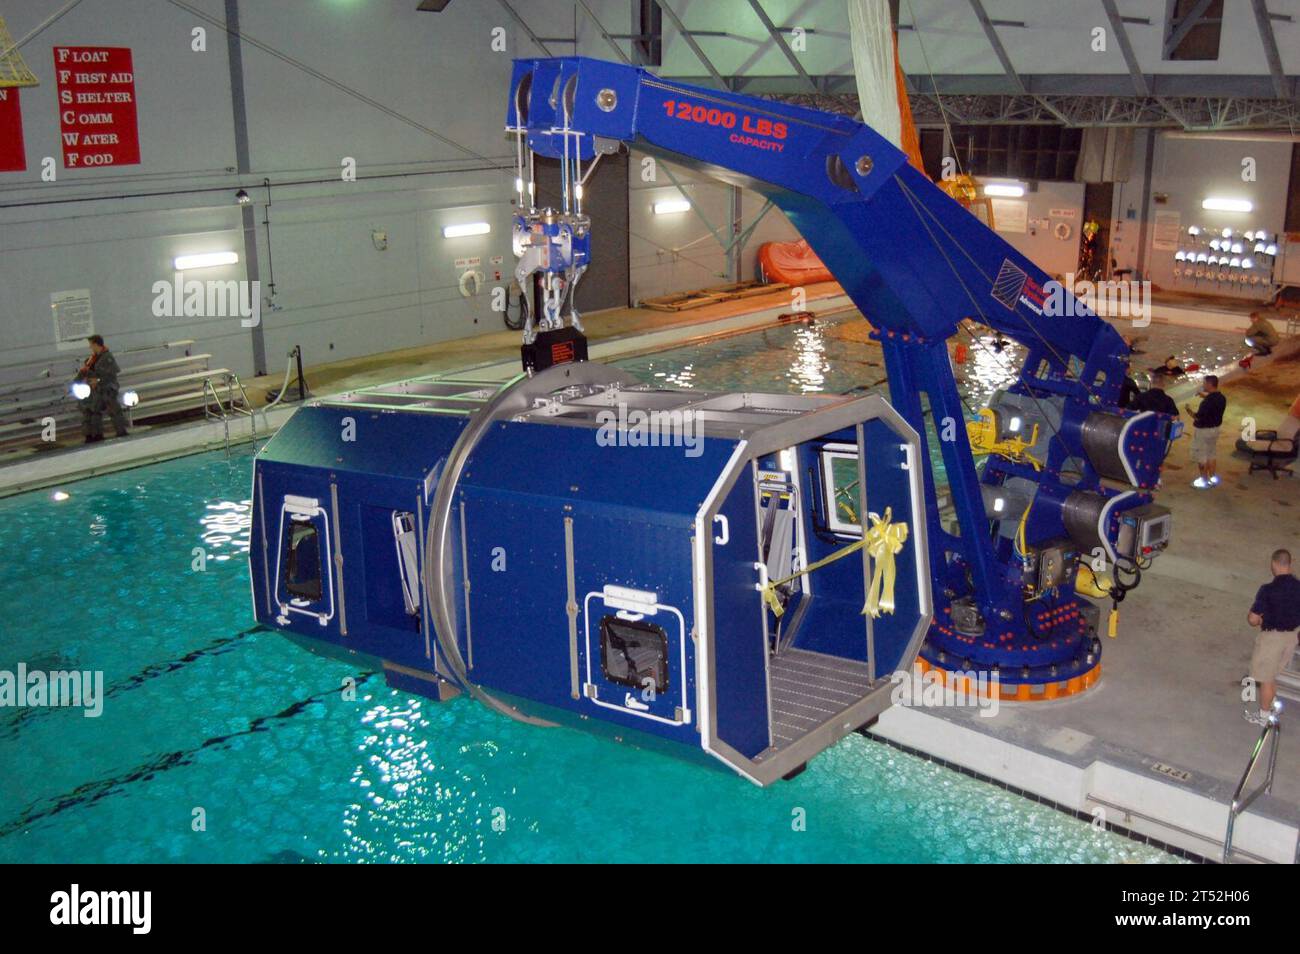 0904287689P-002 JACKSONVILLE, Fla. (April 28, 2009) The new 9D6 Modular Egress Training System at Aviation Survival Training Center Jacksonville simulates an aircraft ditching in a body of water and sinking upside down. (U.S. Navy Stock Photo